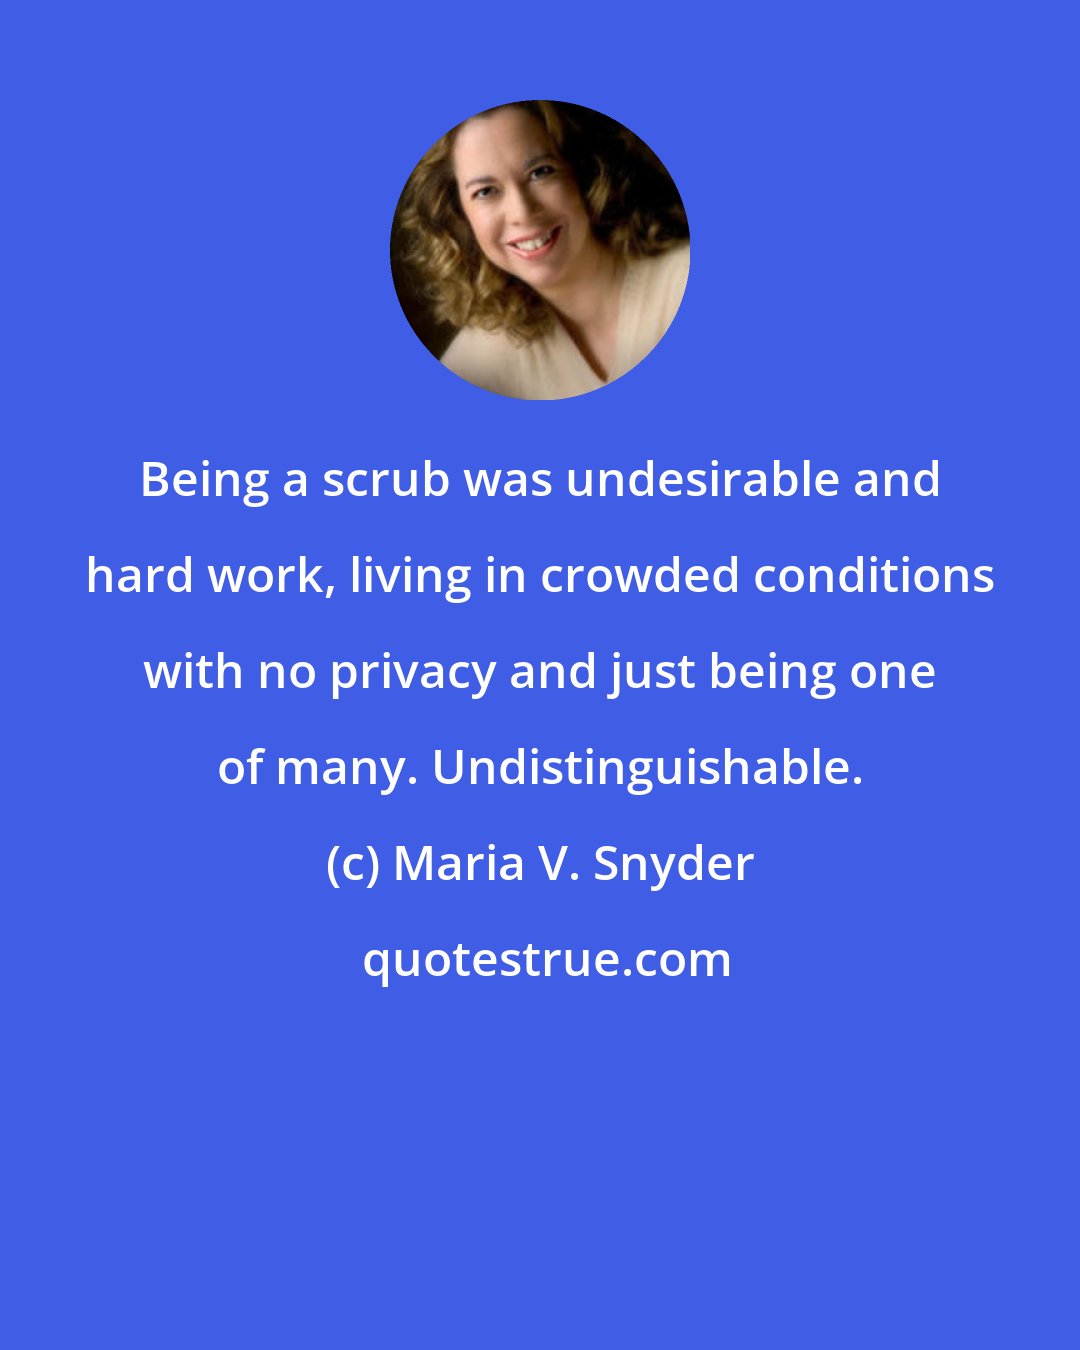 Maria V. Snyder: Being a scrub was undesirable and hard work, living in crowded conditions with no privacy and just being one of many. Undistinguishable.